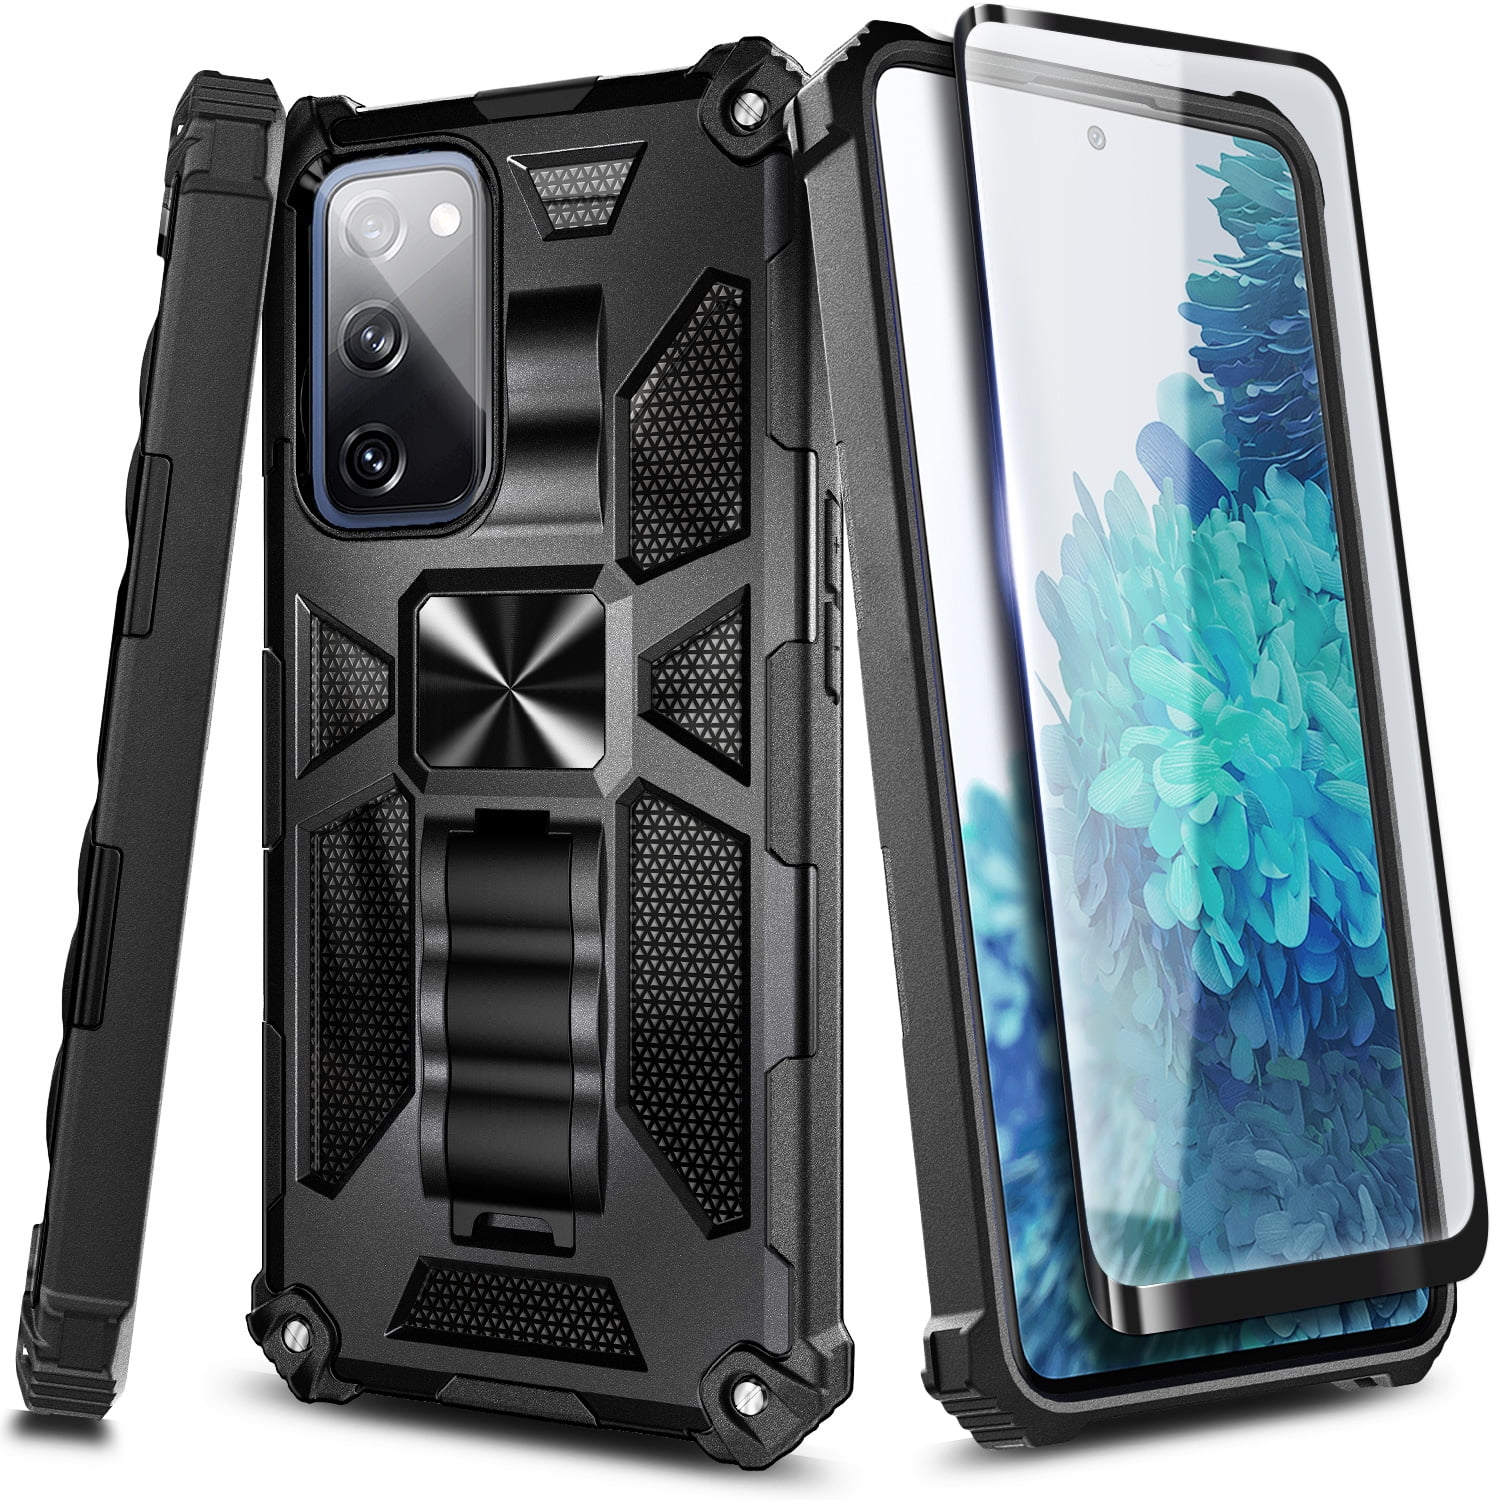  Samsung Galaxy S20 FE 5G case,with HD Screen Protector